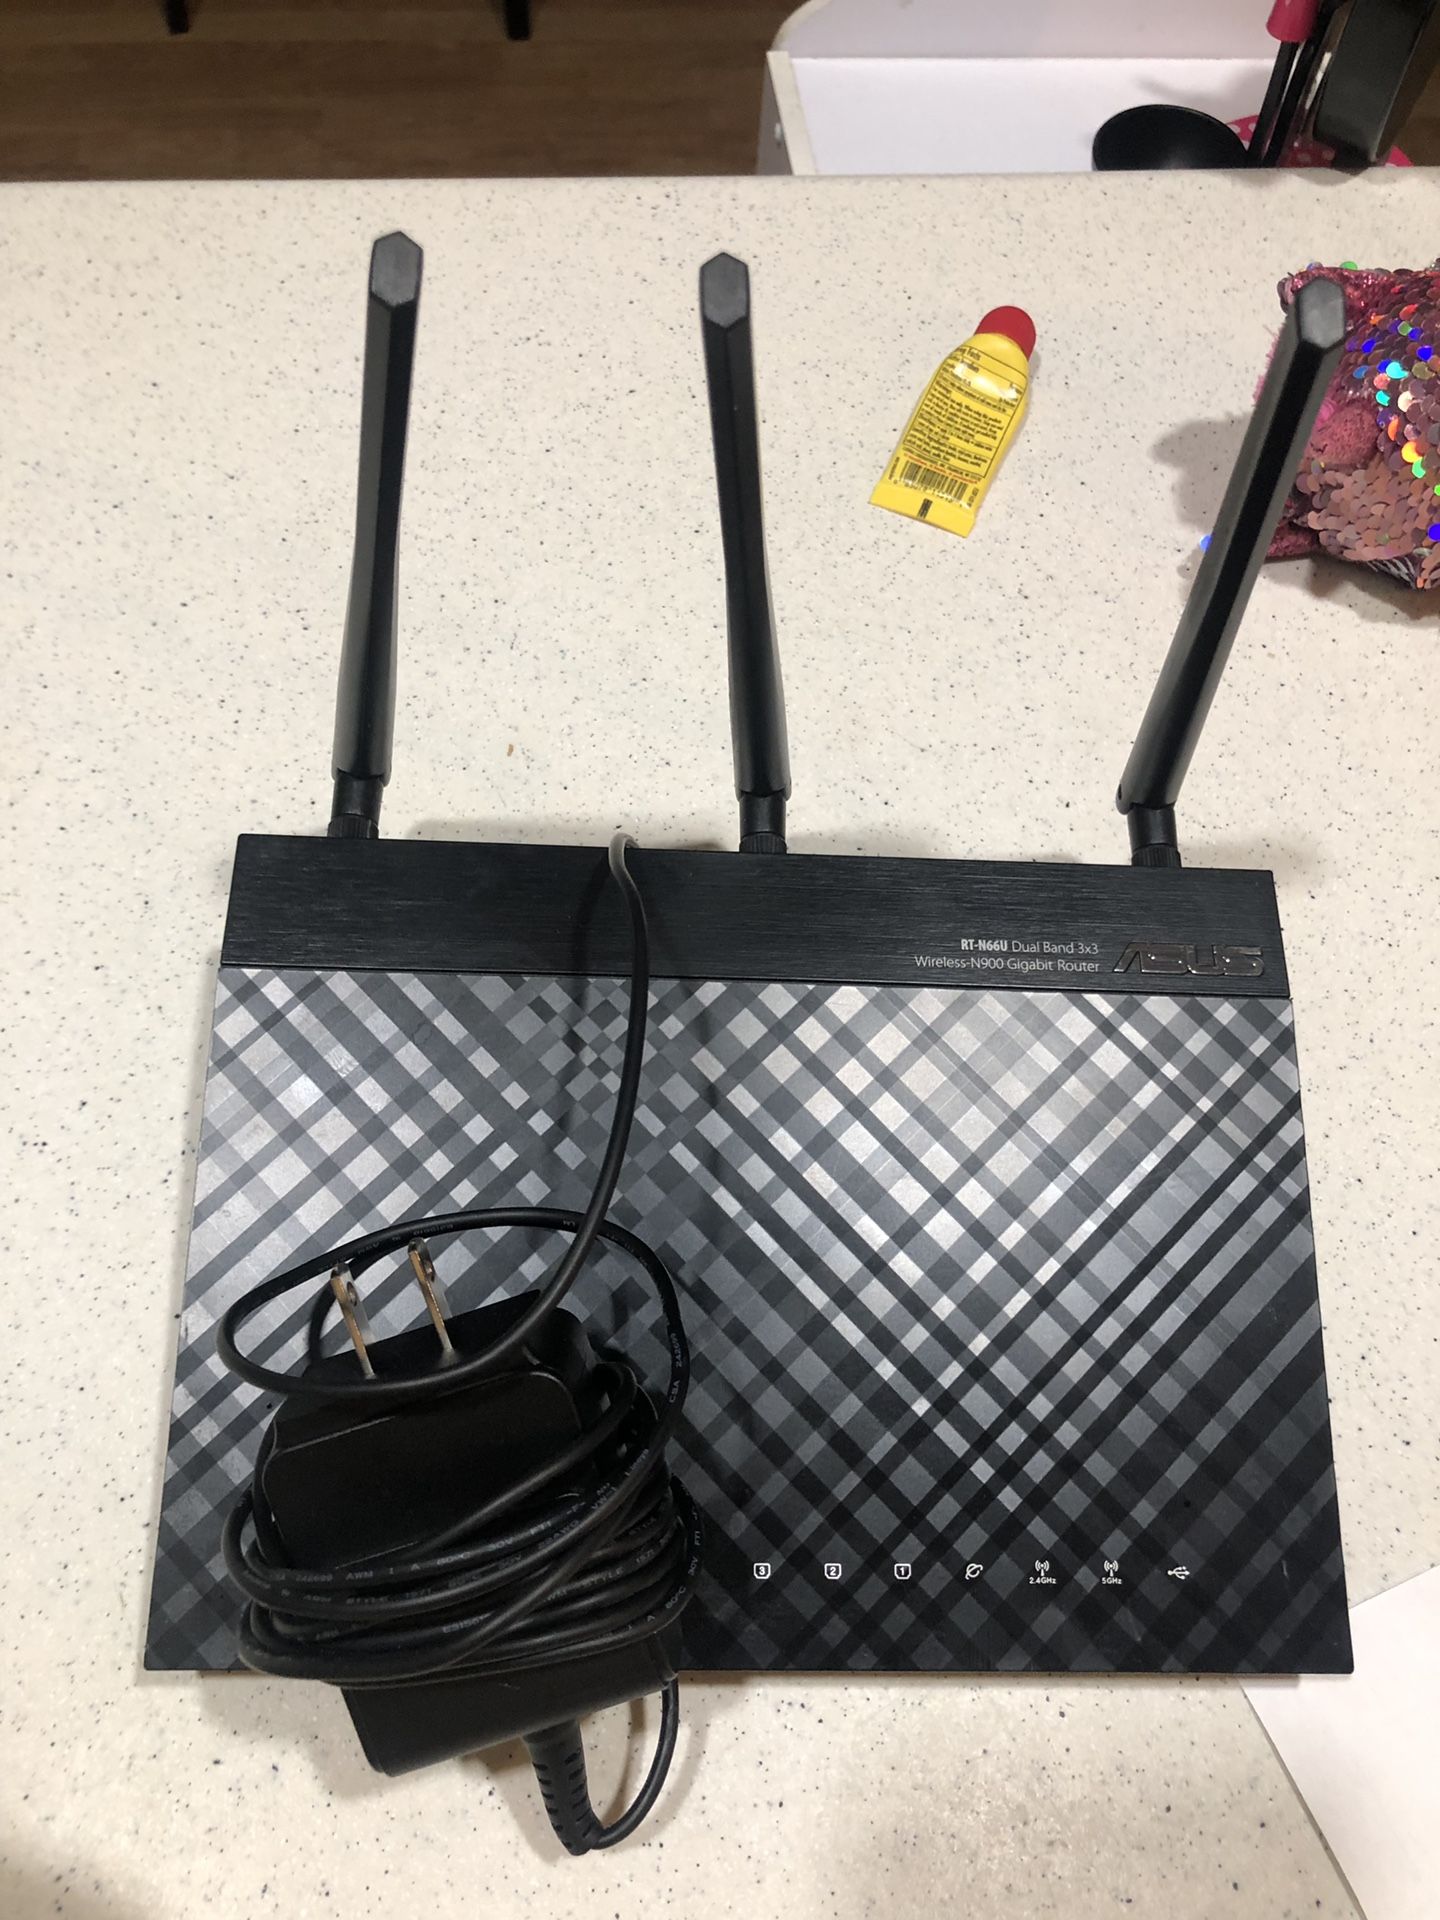 Asus RT-N66U dual band wireless router